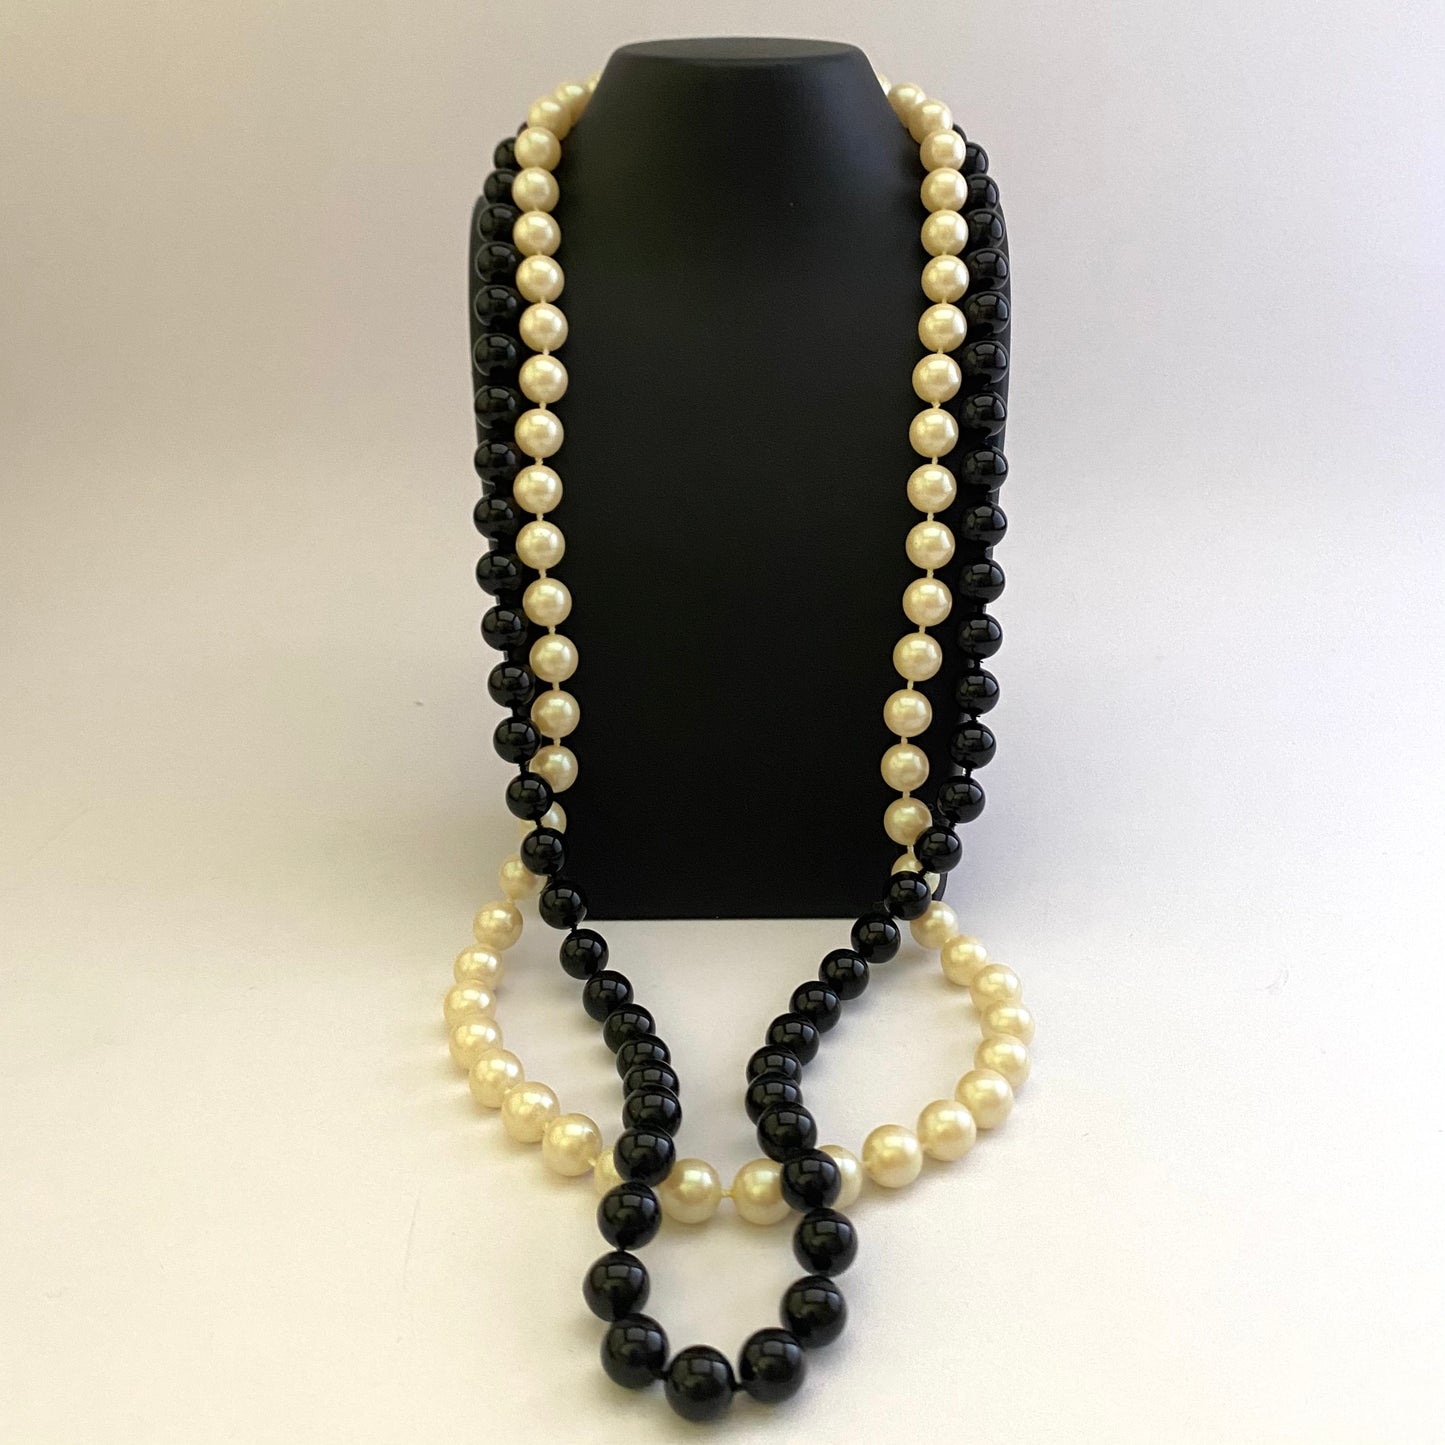 1960s NEW! Hong Kong Double Strand Bead Necklace